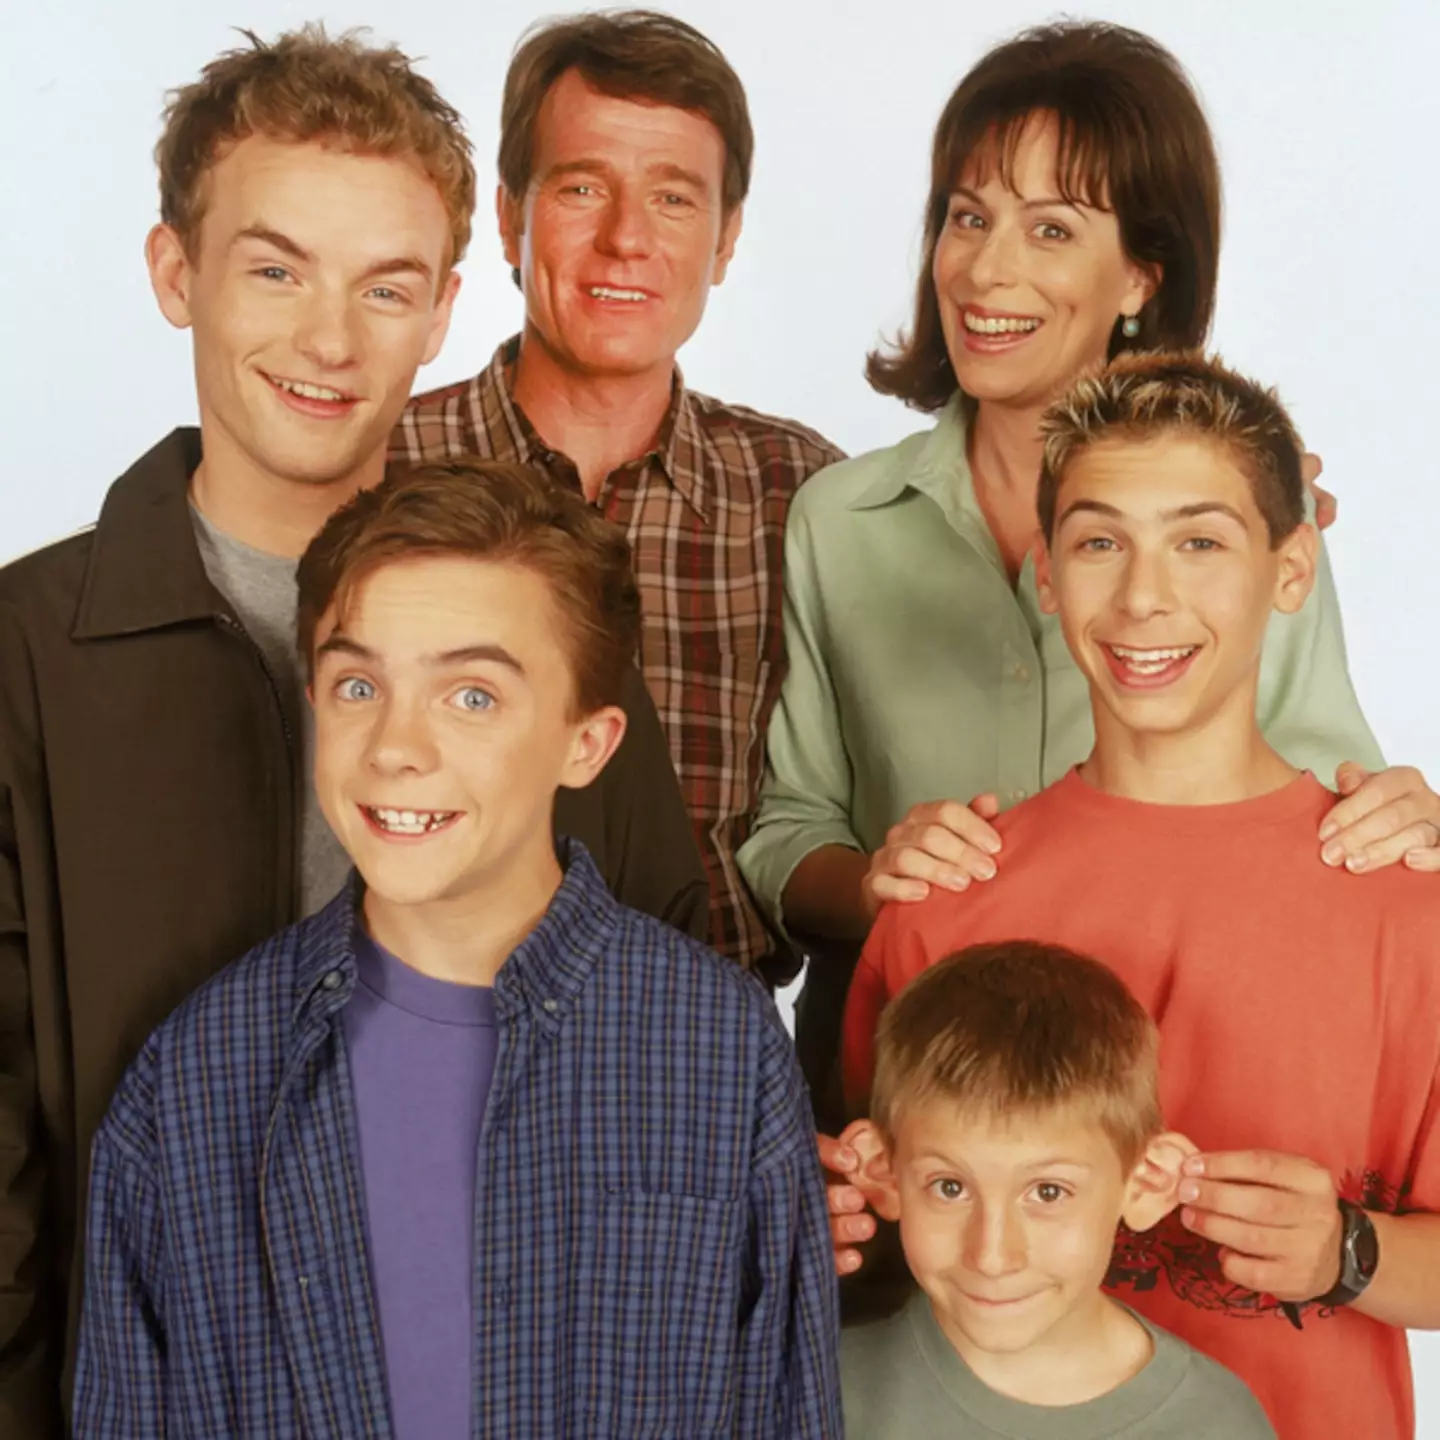 Malcolm in the Middle was huge back in the day.